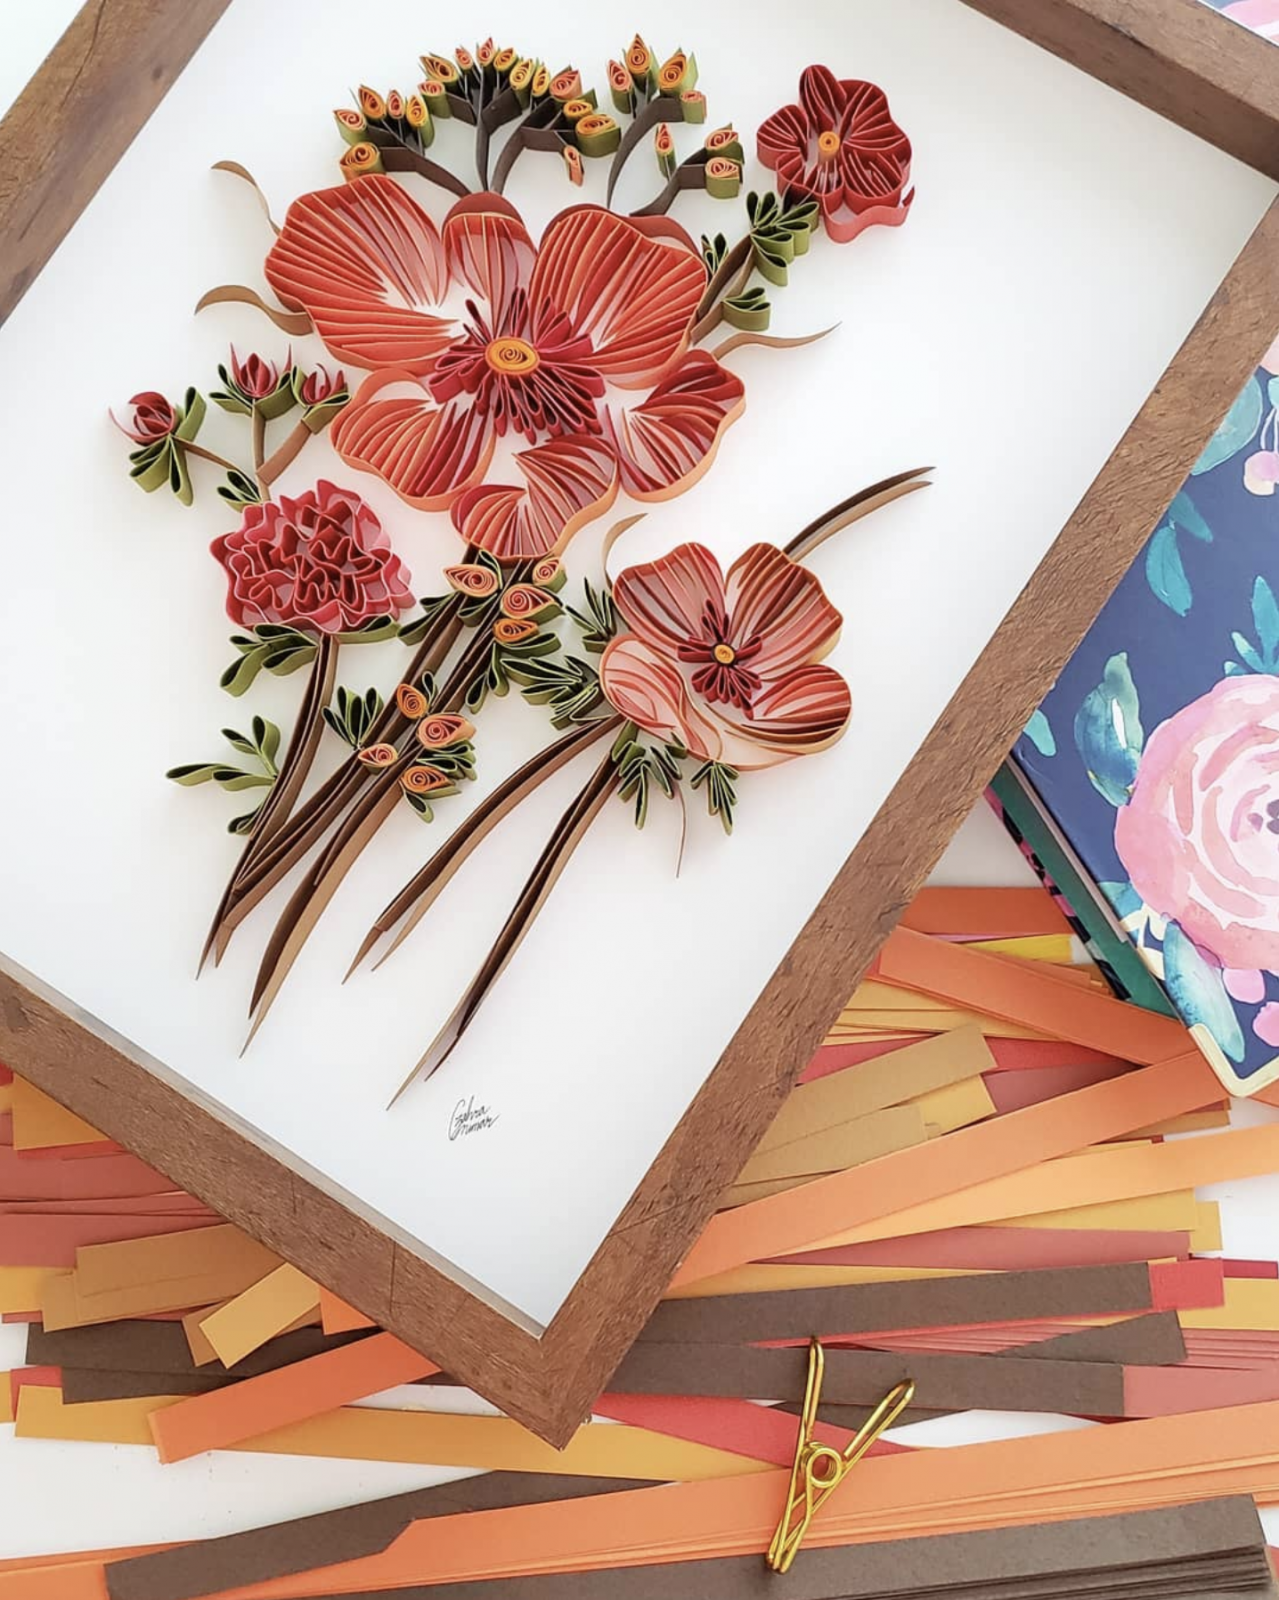 Paper Artist Zahra Ammar Loves the Versatility and Form Paper Offers